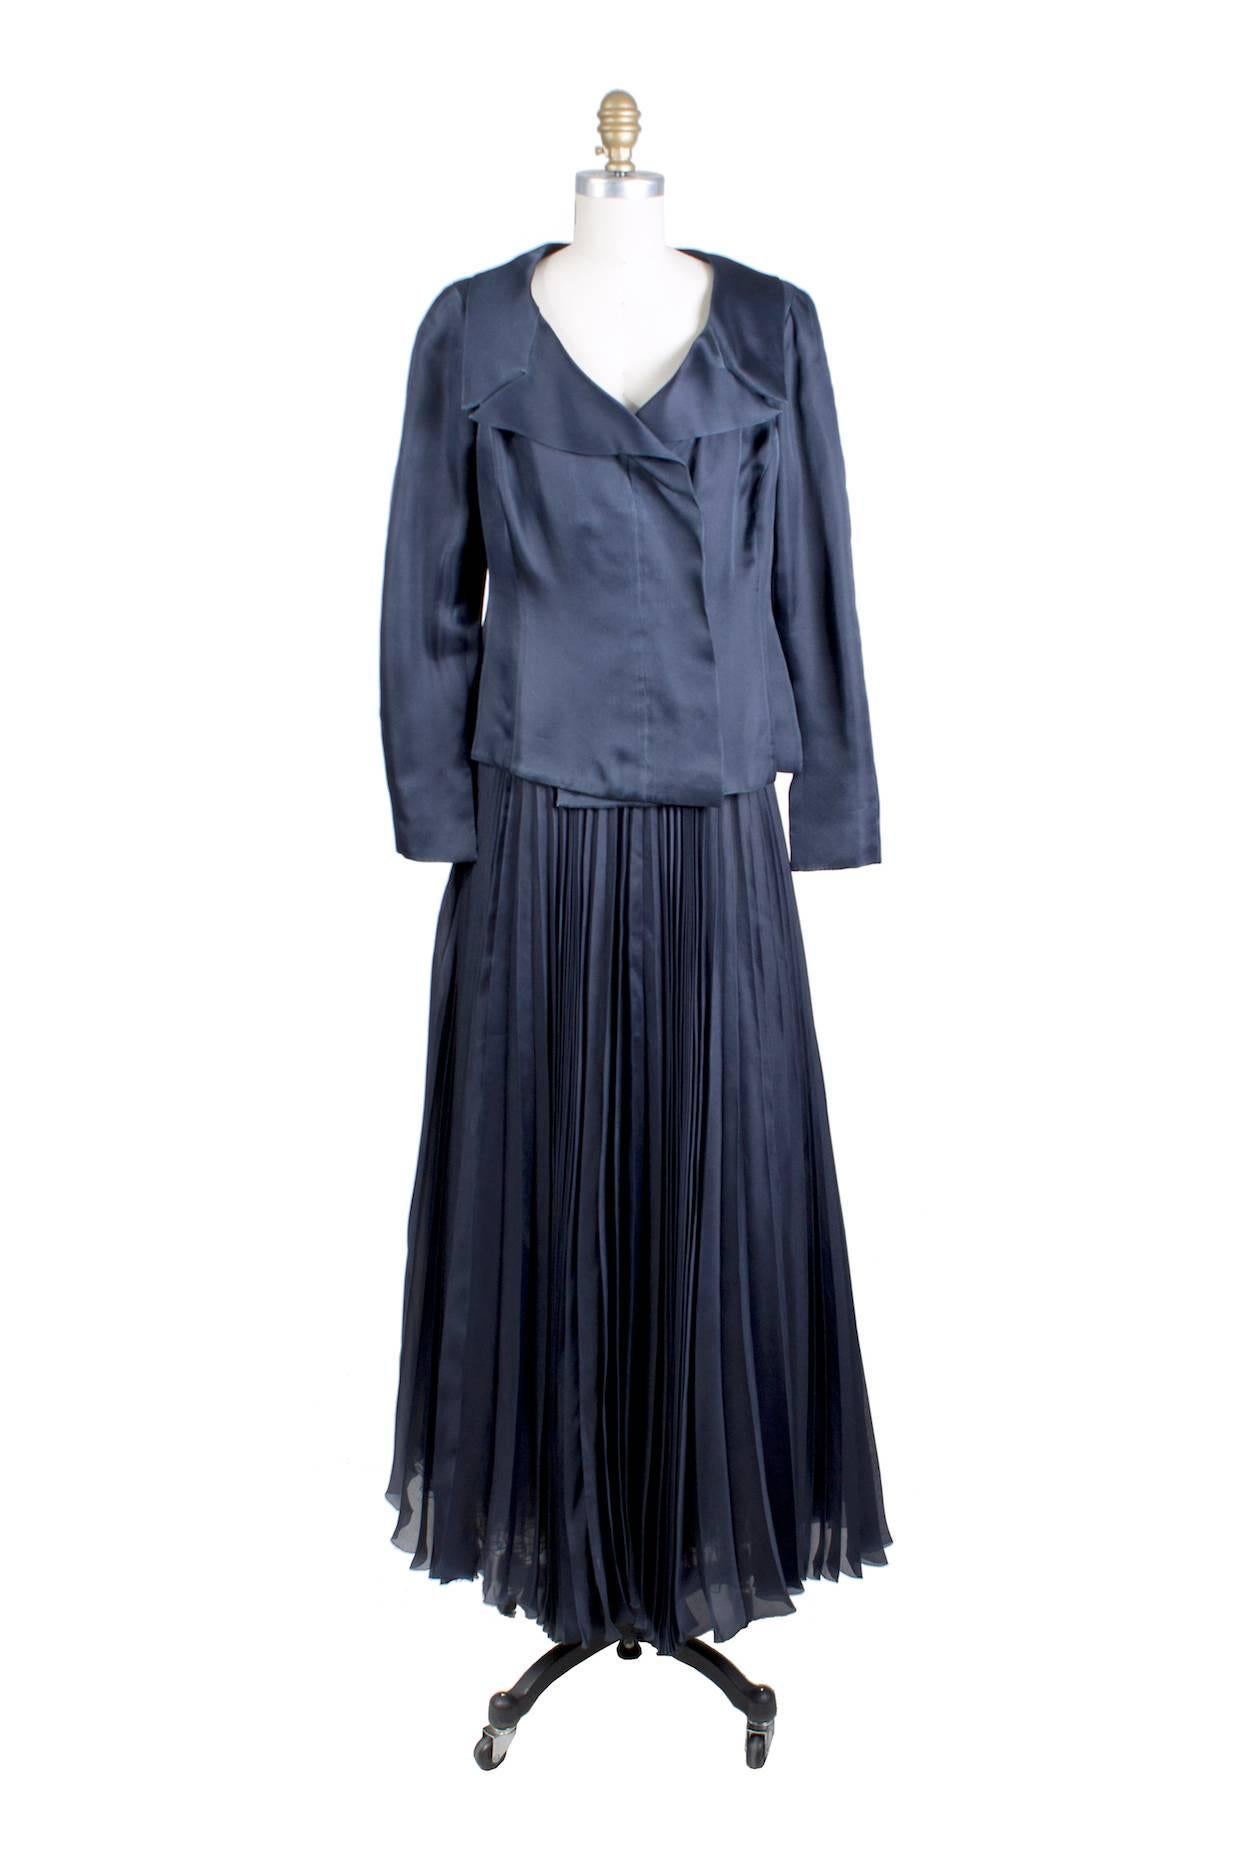 This is a couture dress by Chanel c. 2000s.  It features a pleated skirt and the dress comes with a matching jacket.  Made from layers of sheer navy blue silk and it has a mesh and tulle lining in the skirt.  Couture serial number is